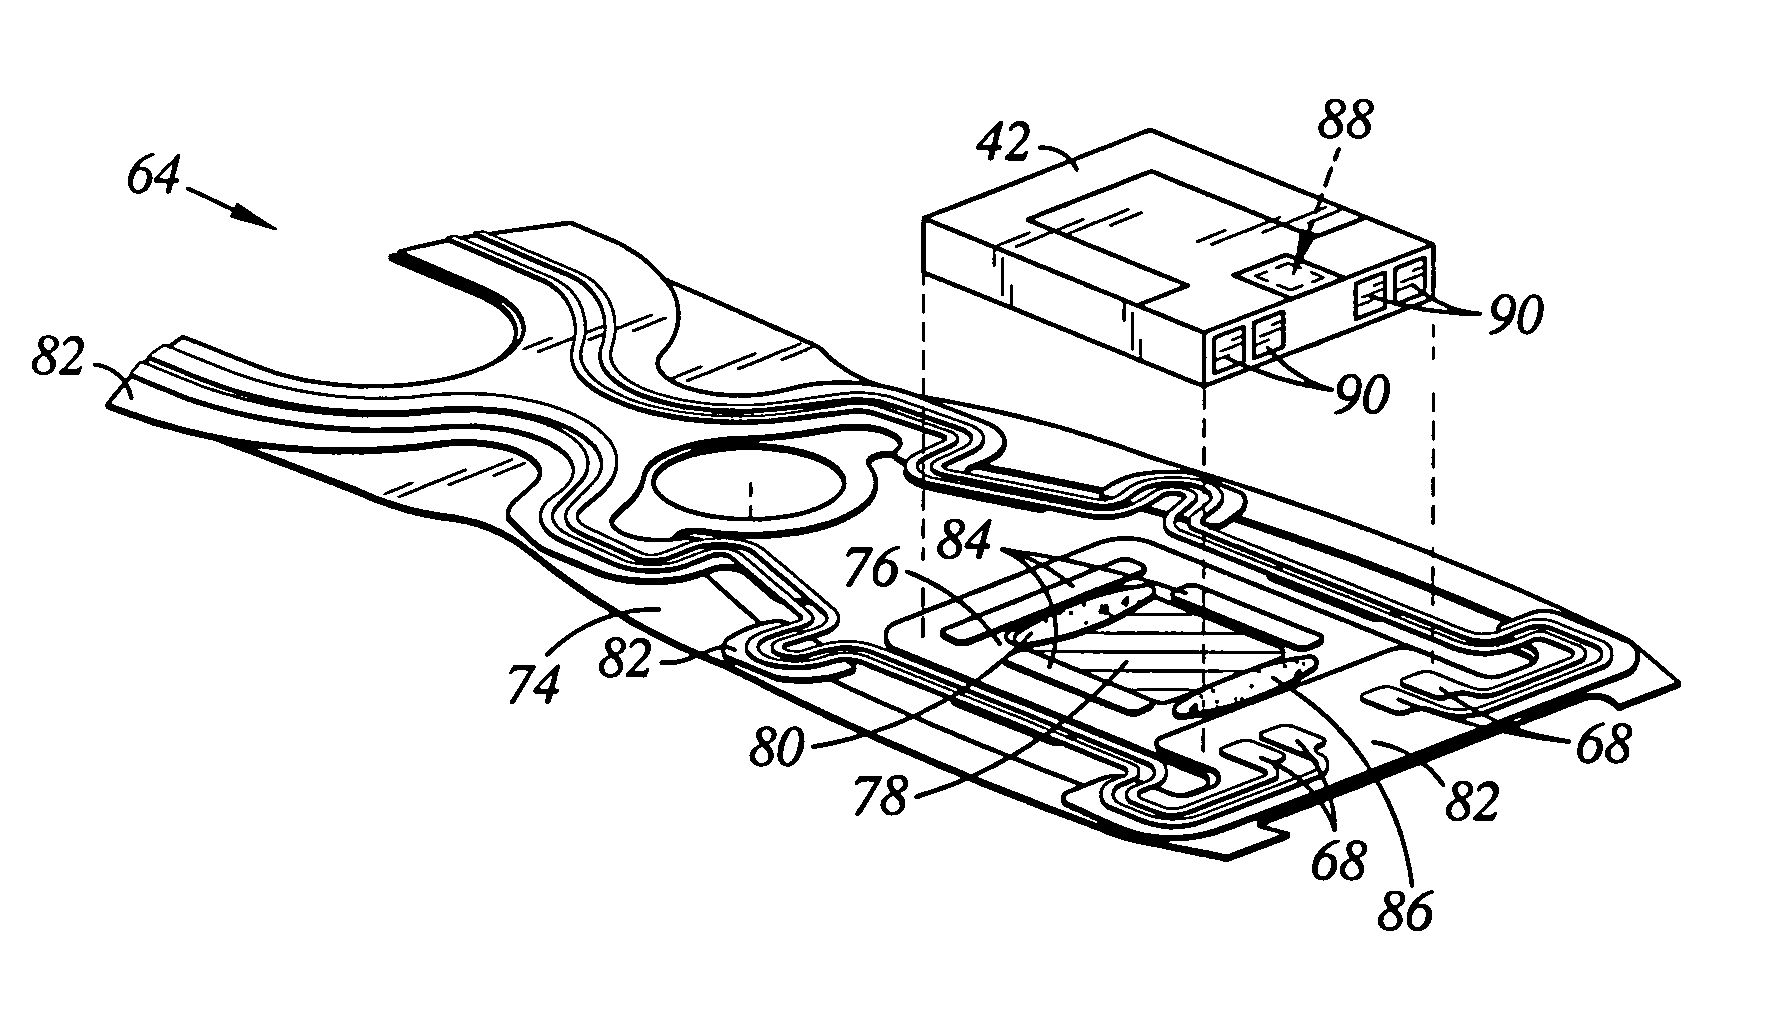 Head gimbal assembly including a trace suspension assembly backing layer with a conductive layer formed upon a gimbal having a lower oxidation rate